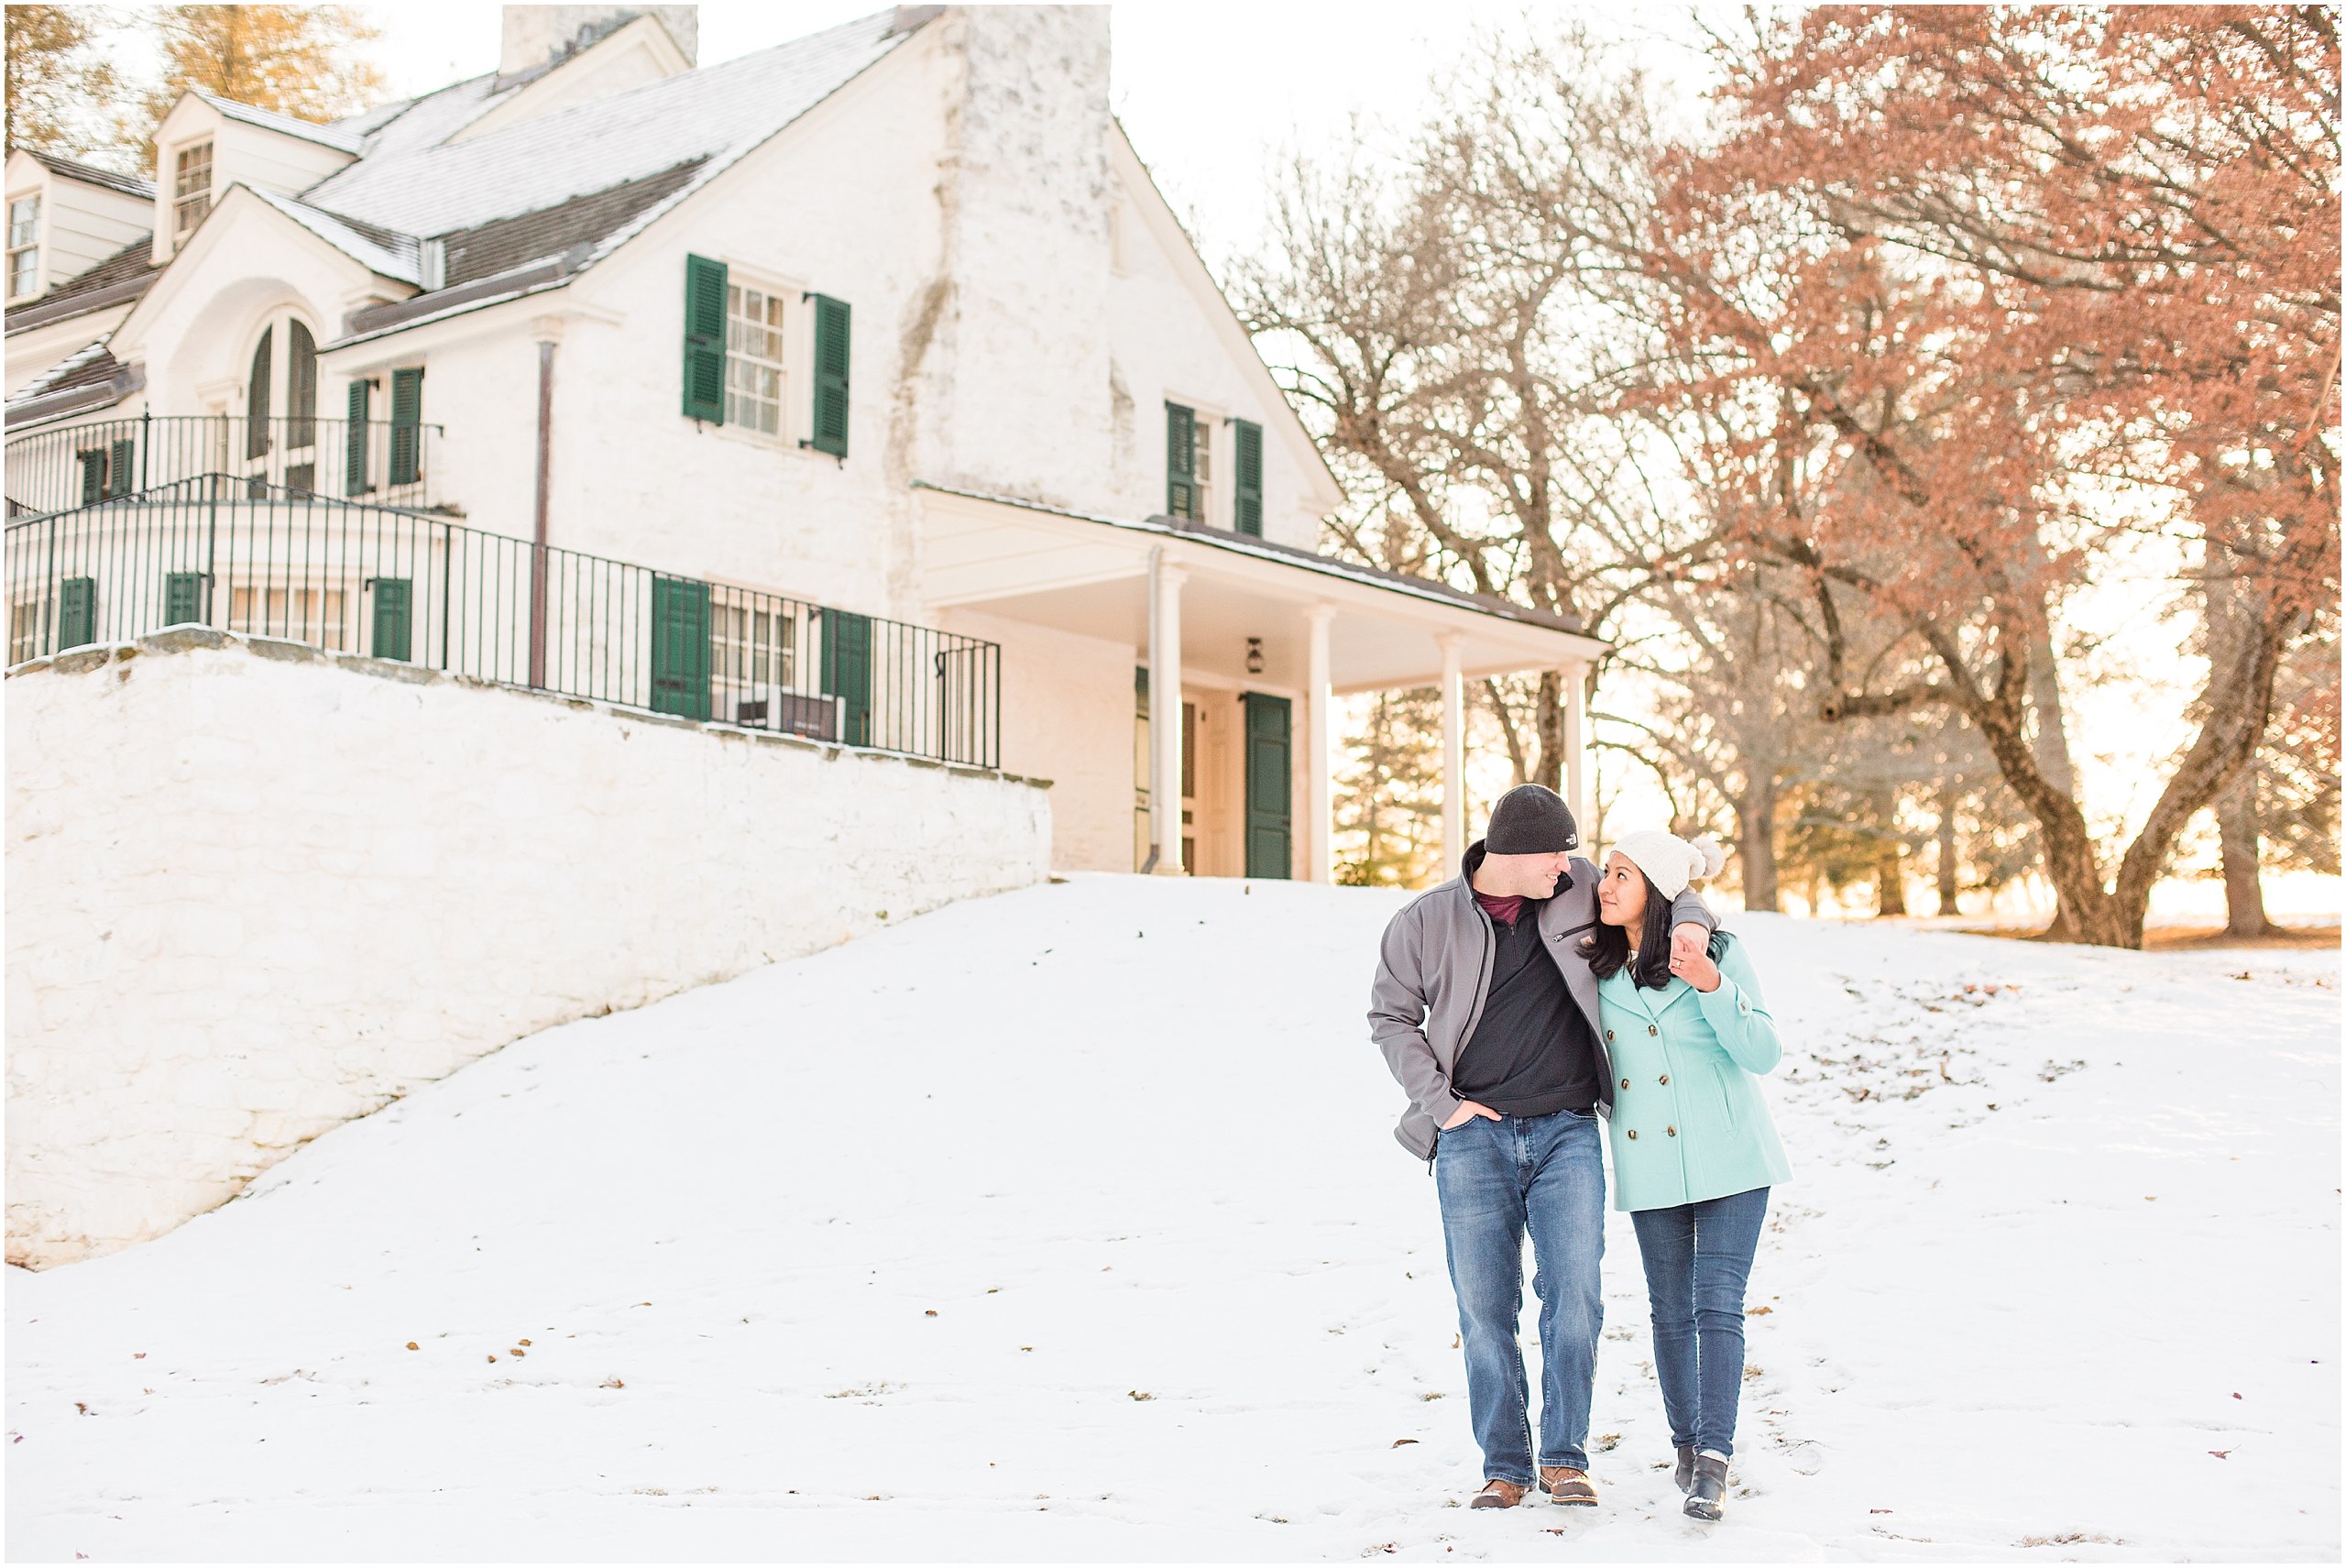 Brad & Mary's Snowy Winter Engagement at Valley Forge Park in Wayne, PA Photos